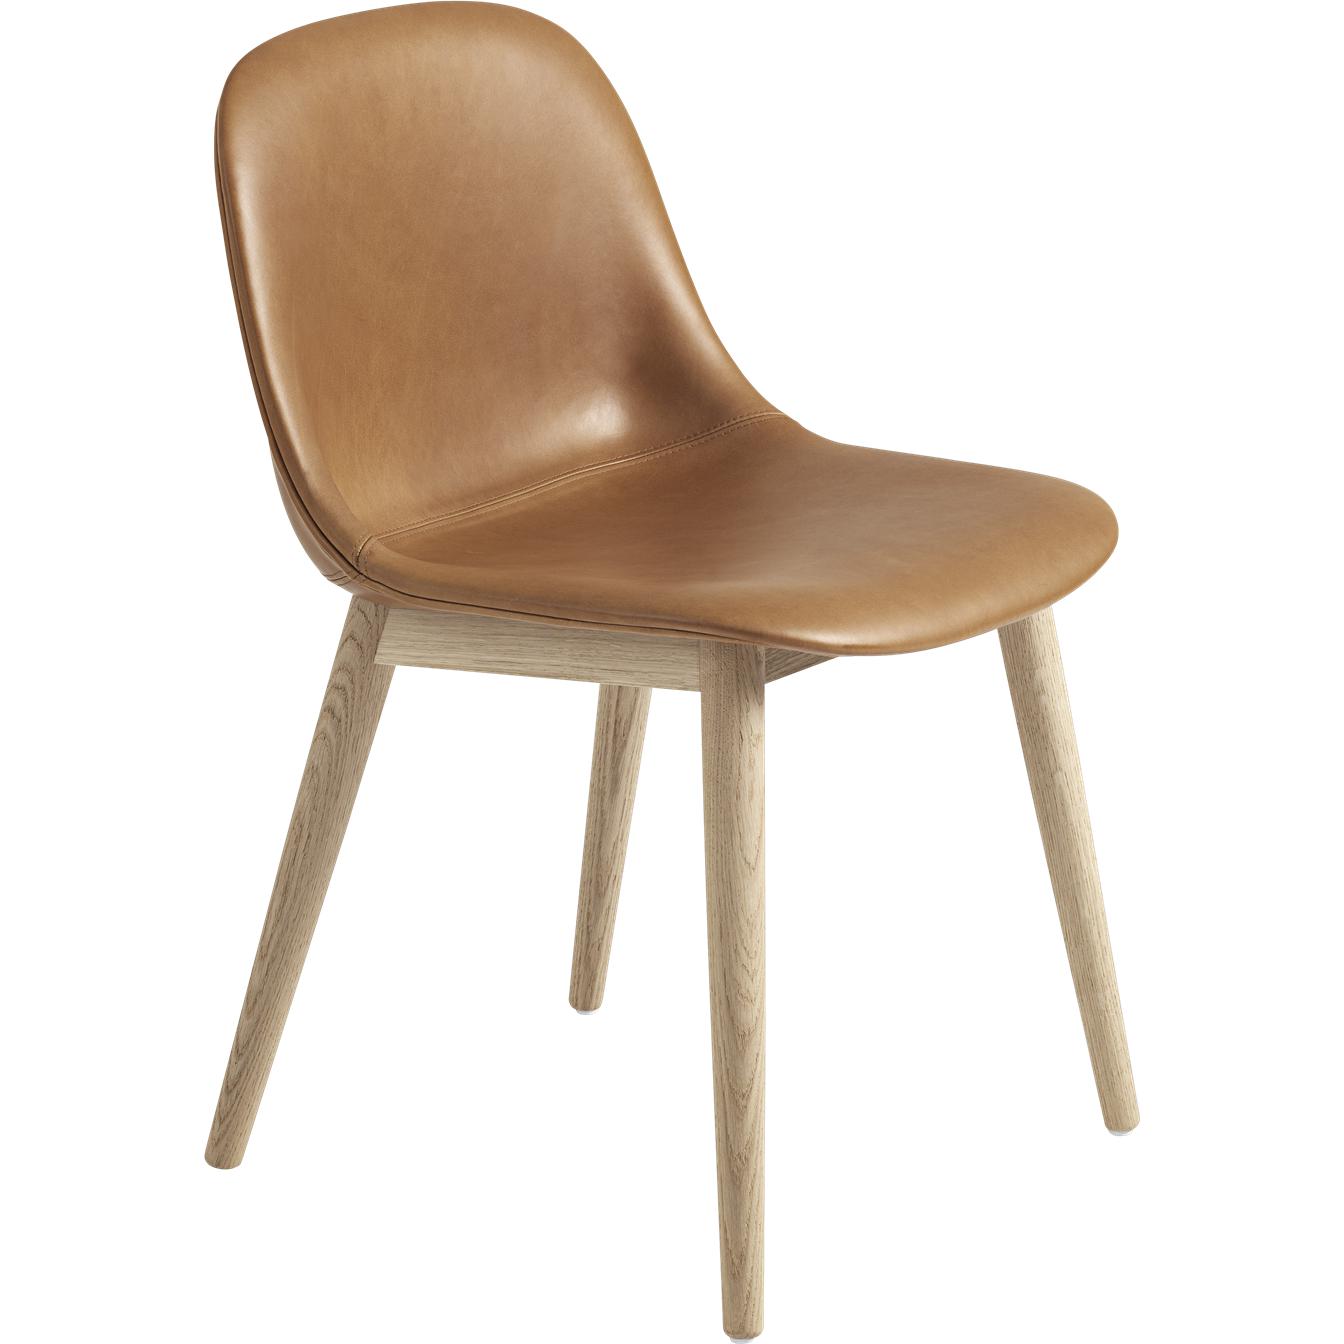 Muuto Fiber Side Chair Wooden Legs, Leather Seat, Brown Cognac Leather